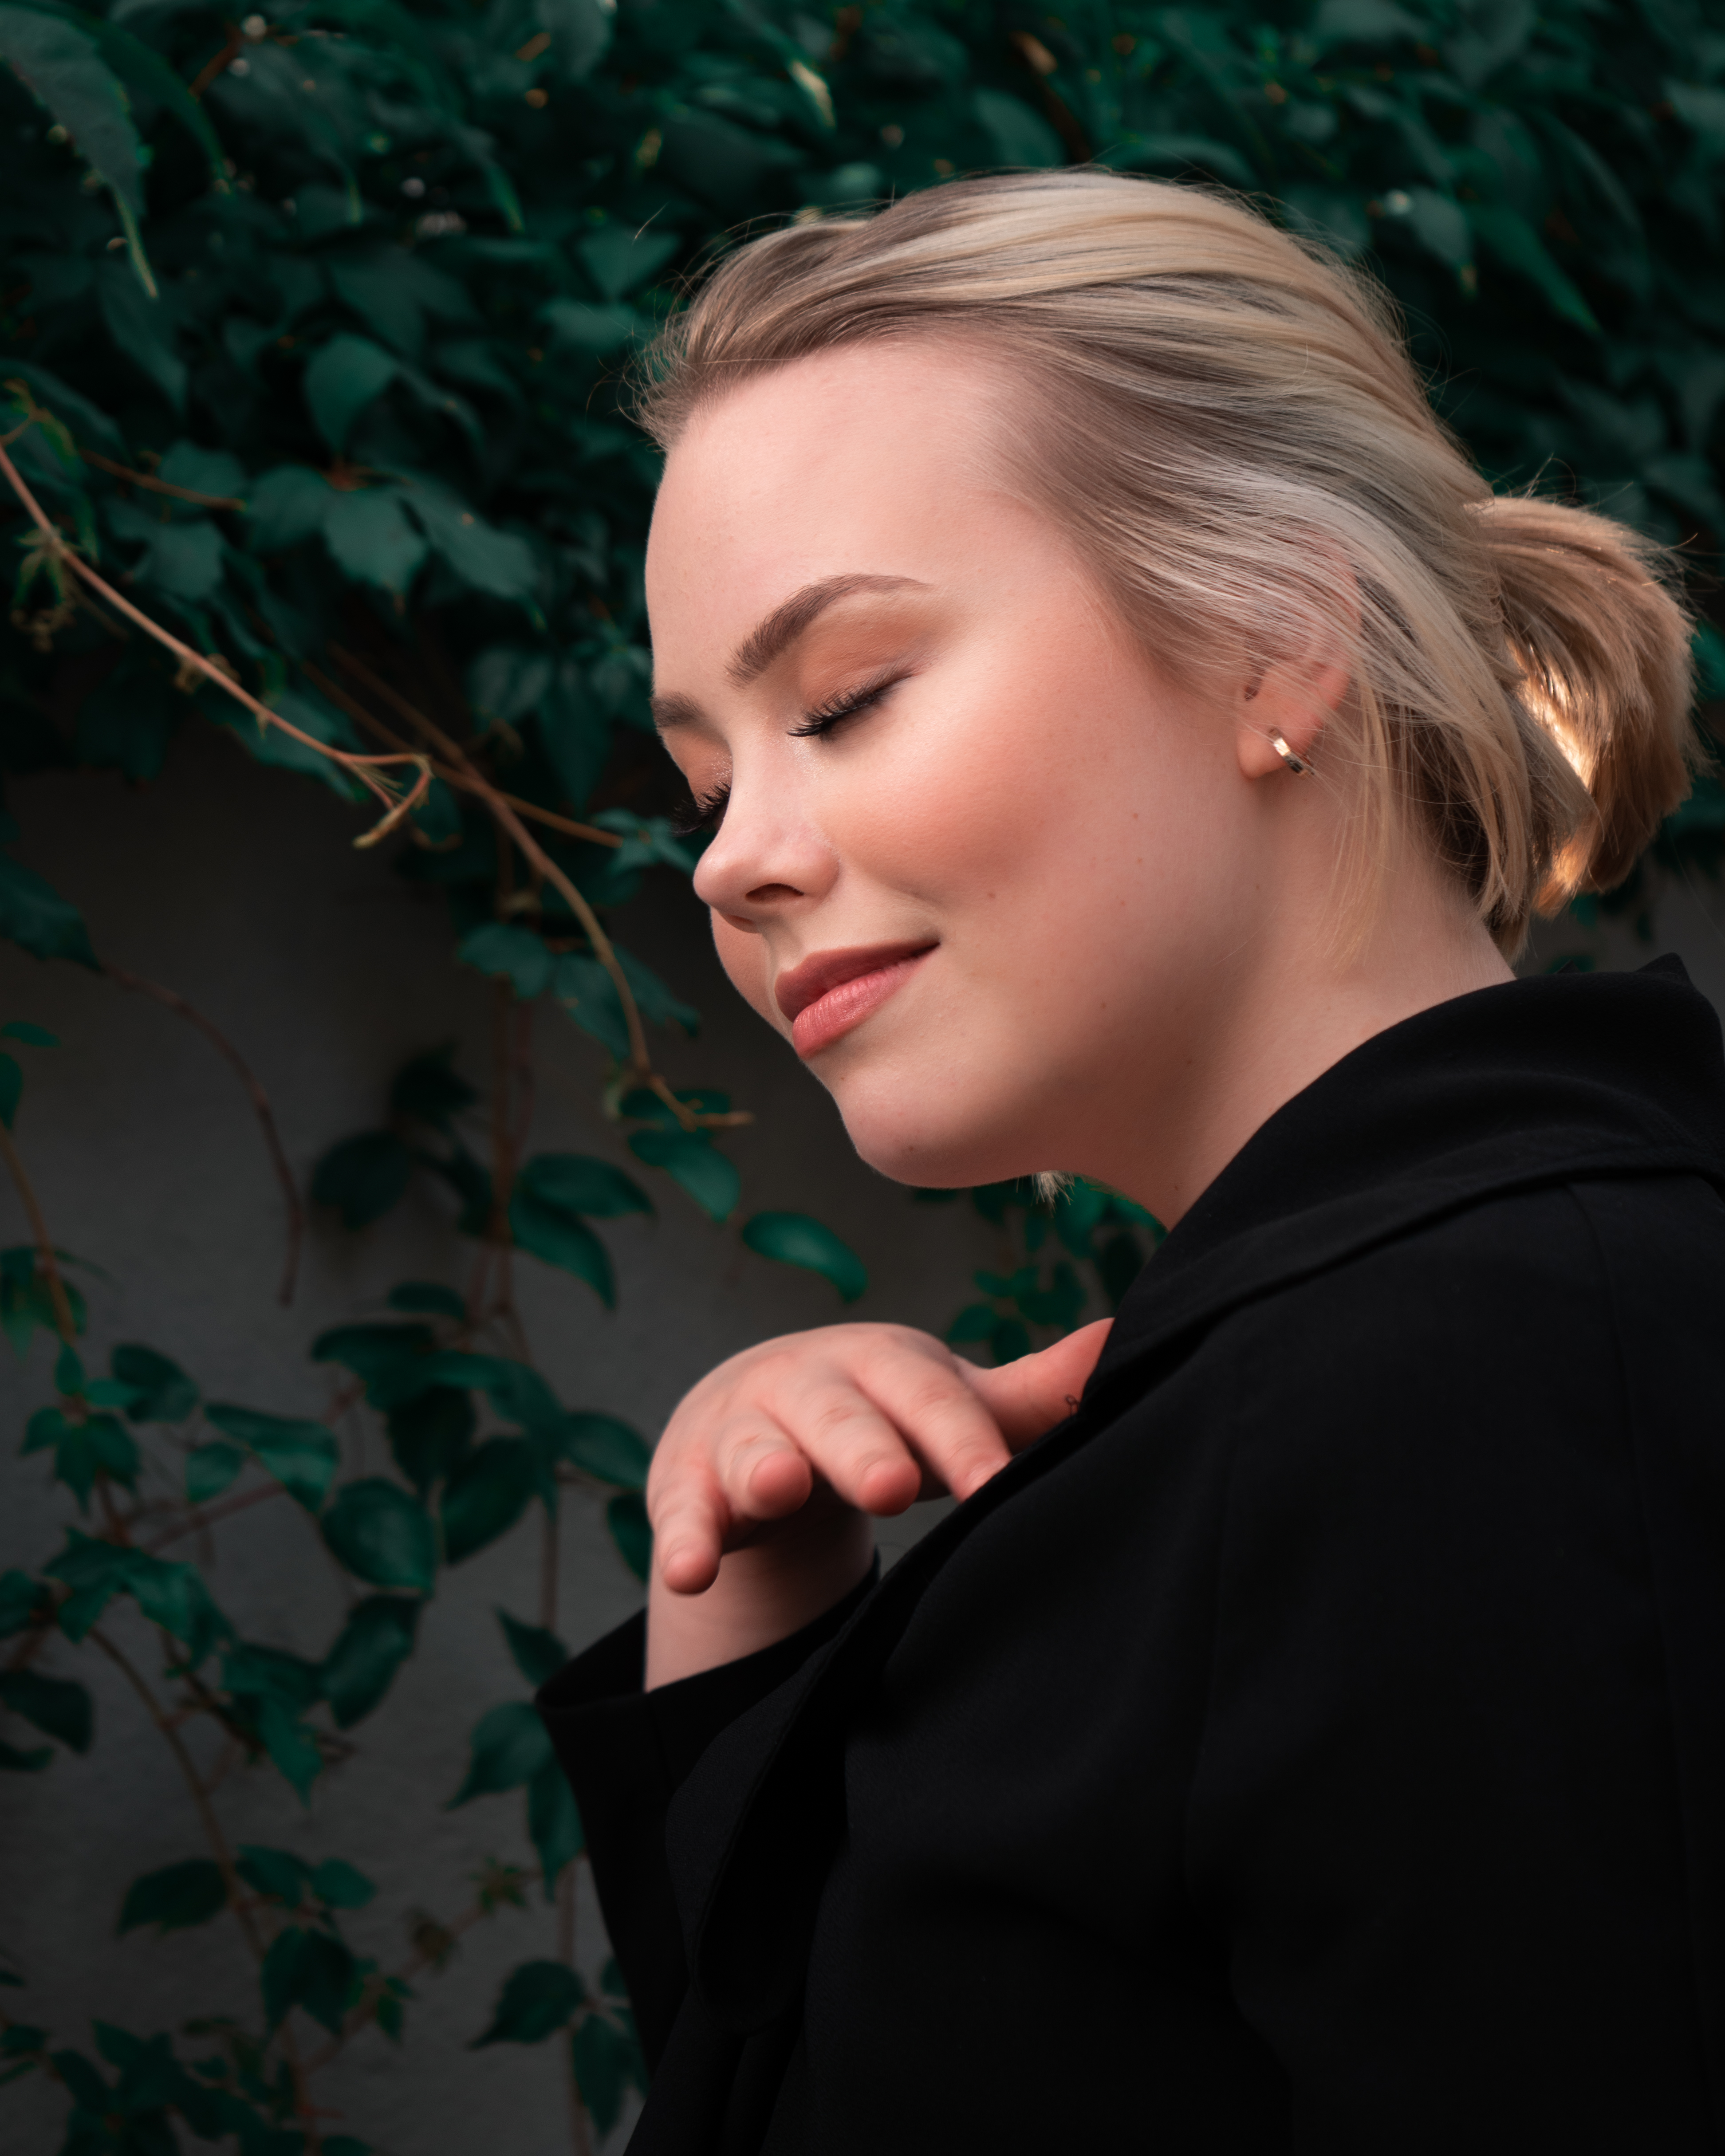 Blonde woman with blue eyes is wearing a black coat and a black blouse. She is standing in front of a wall that has leaves growing on it. She is smiling with her eyes closed.